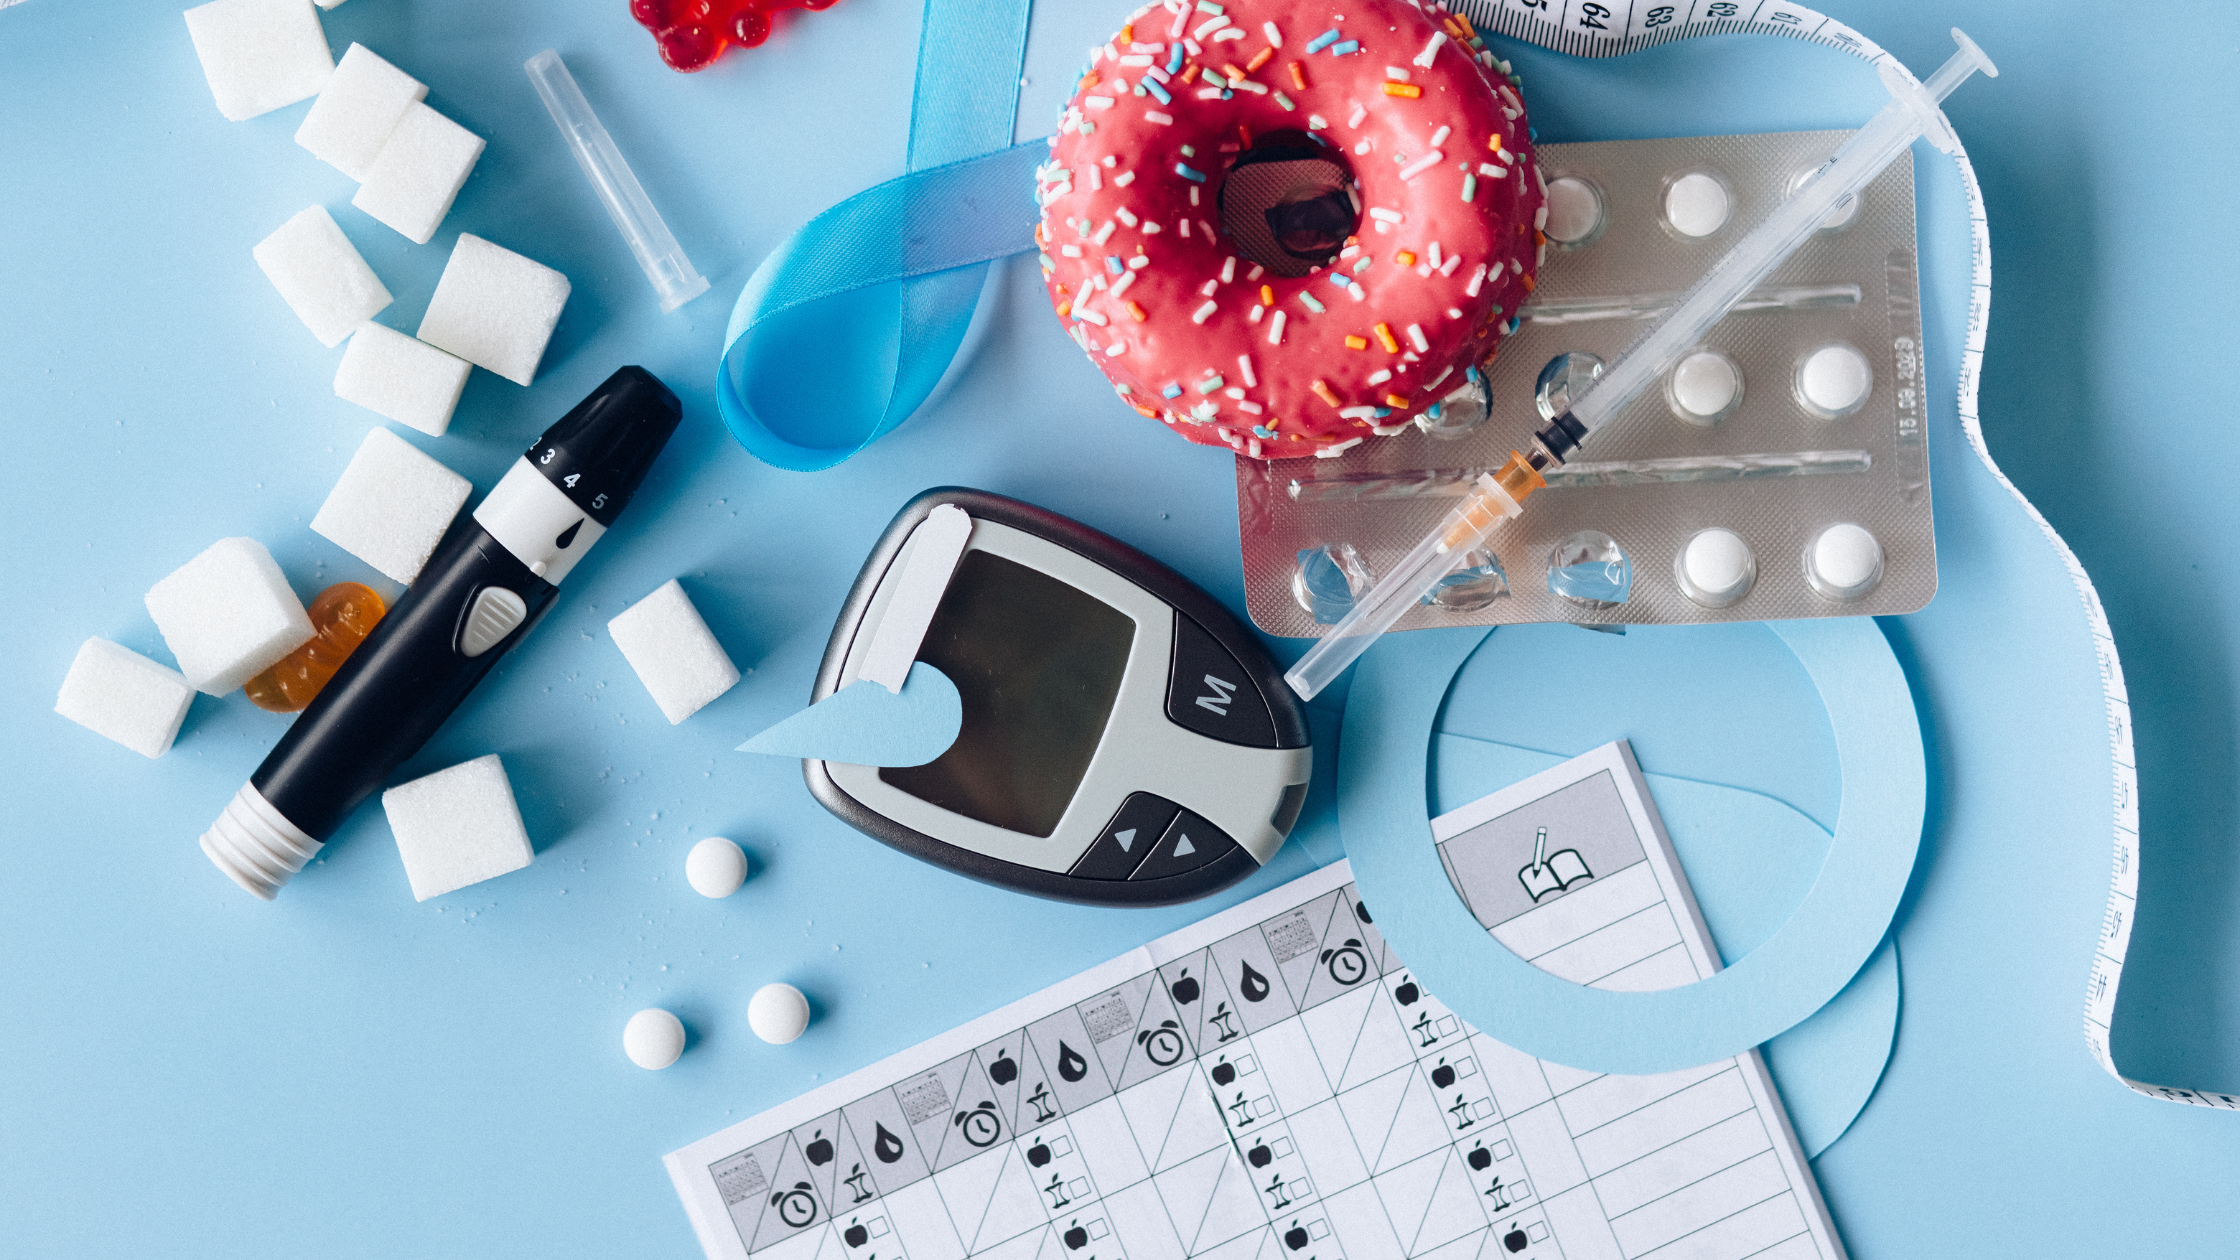 tabletop covered in needles, diabetes tests, donuts, and medicine